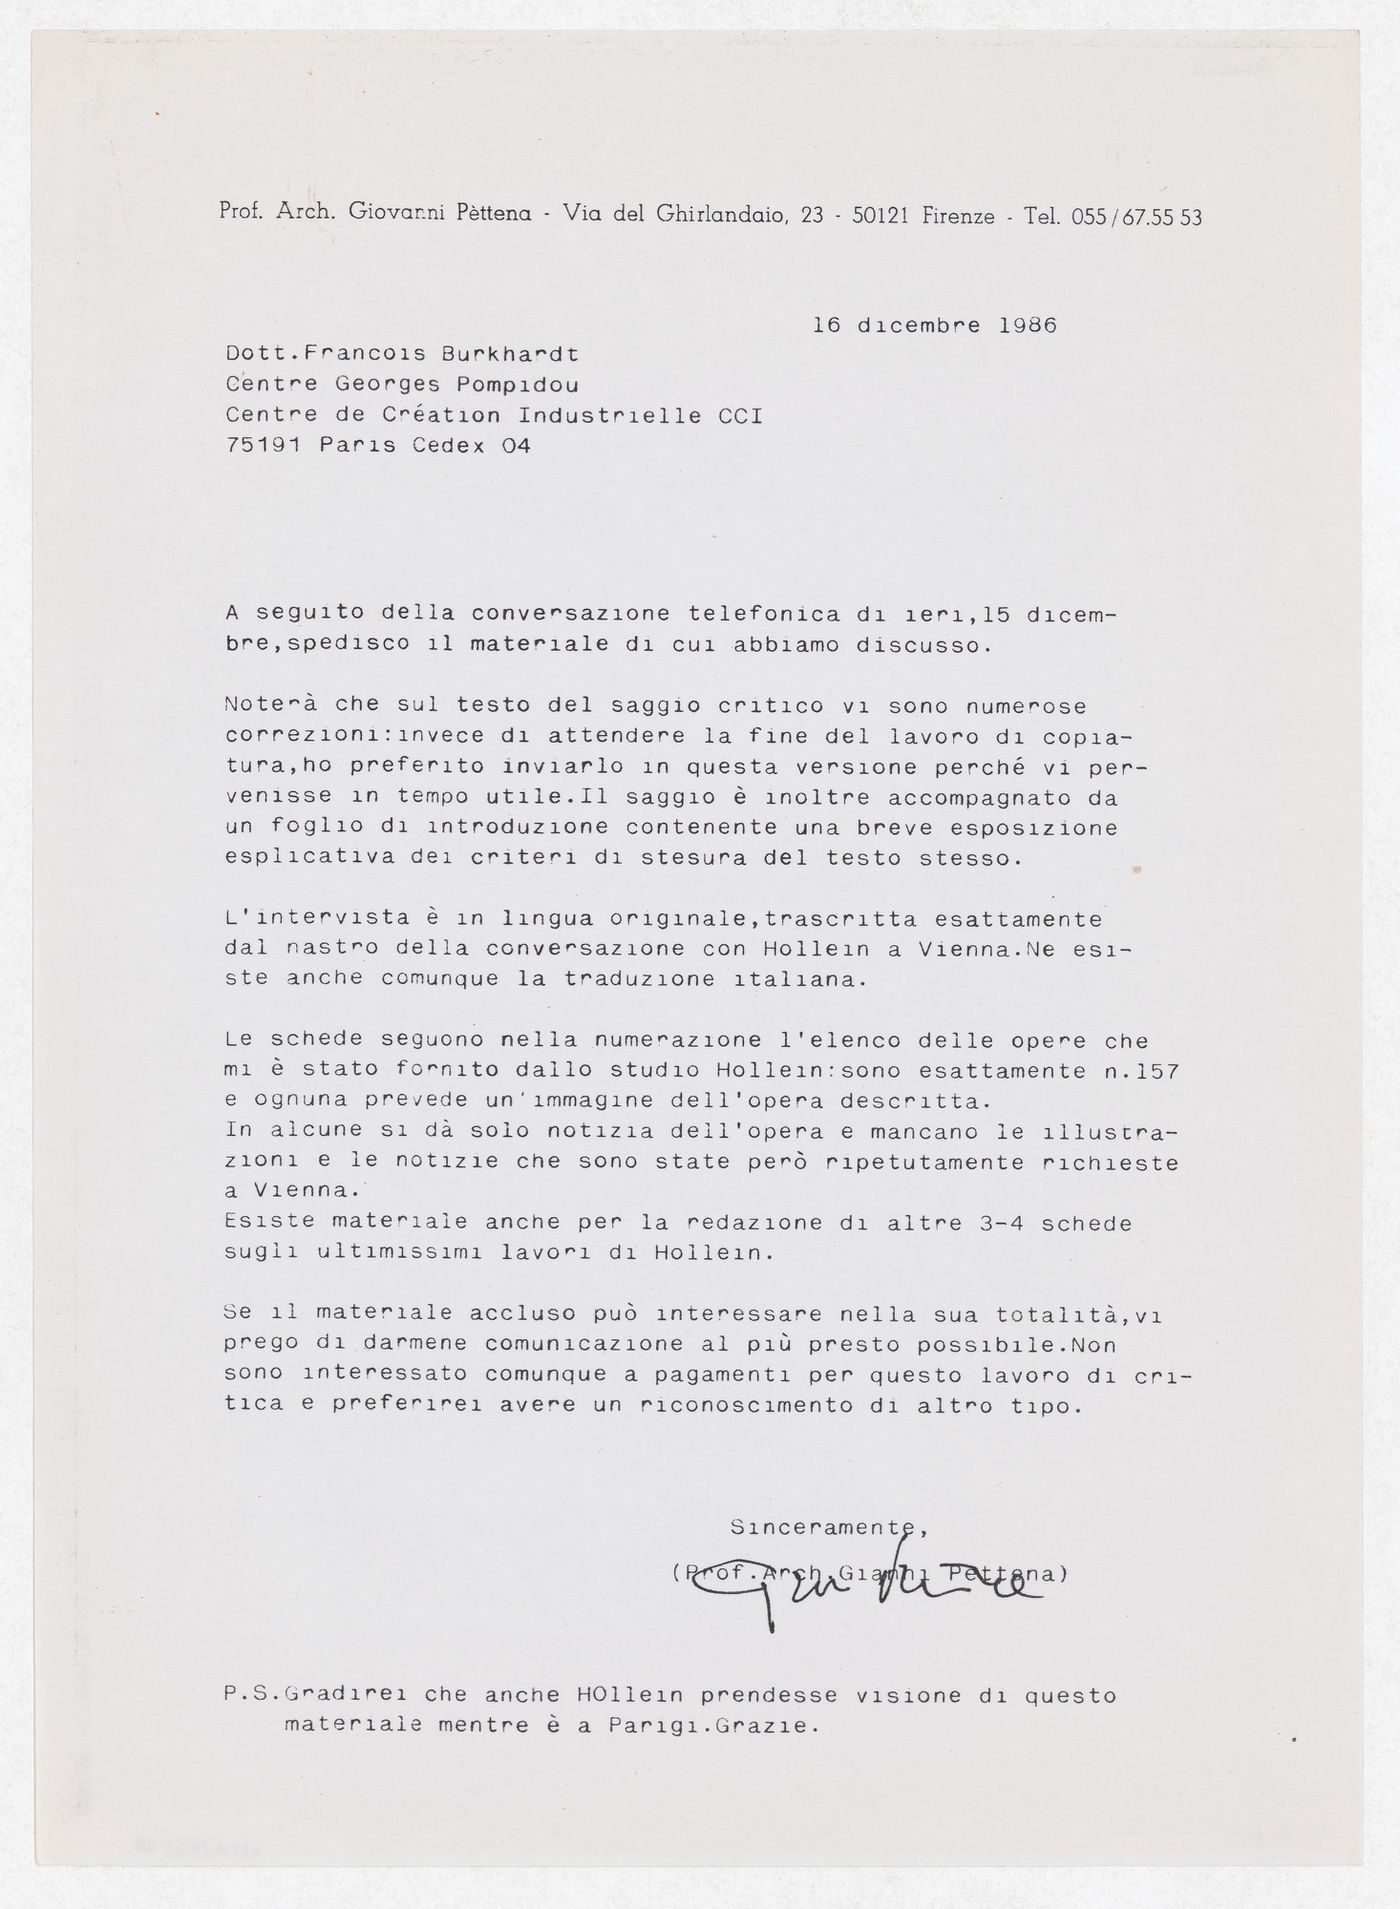 Correspondence from Gianni Pettena to the Georges Pompidou Centre for the exhibition Hans Hollein. Opere 1960-1988